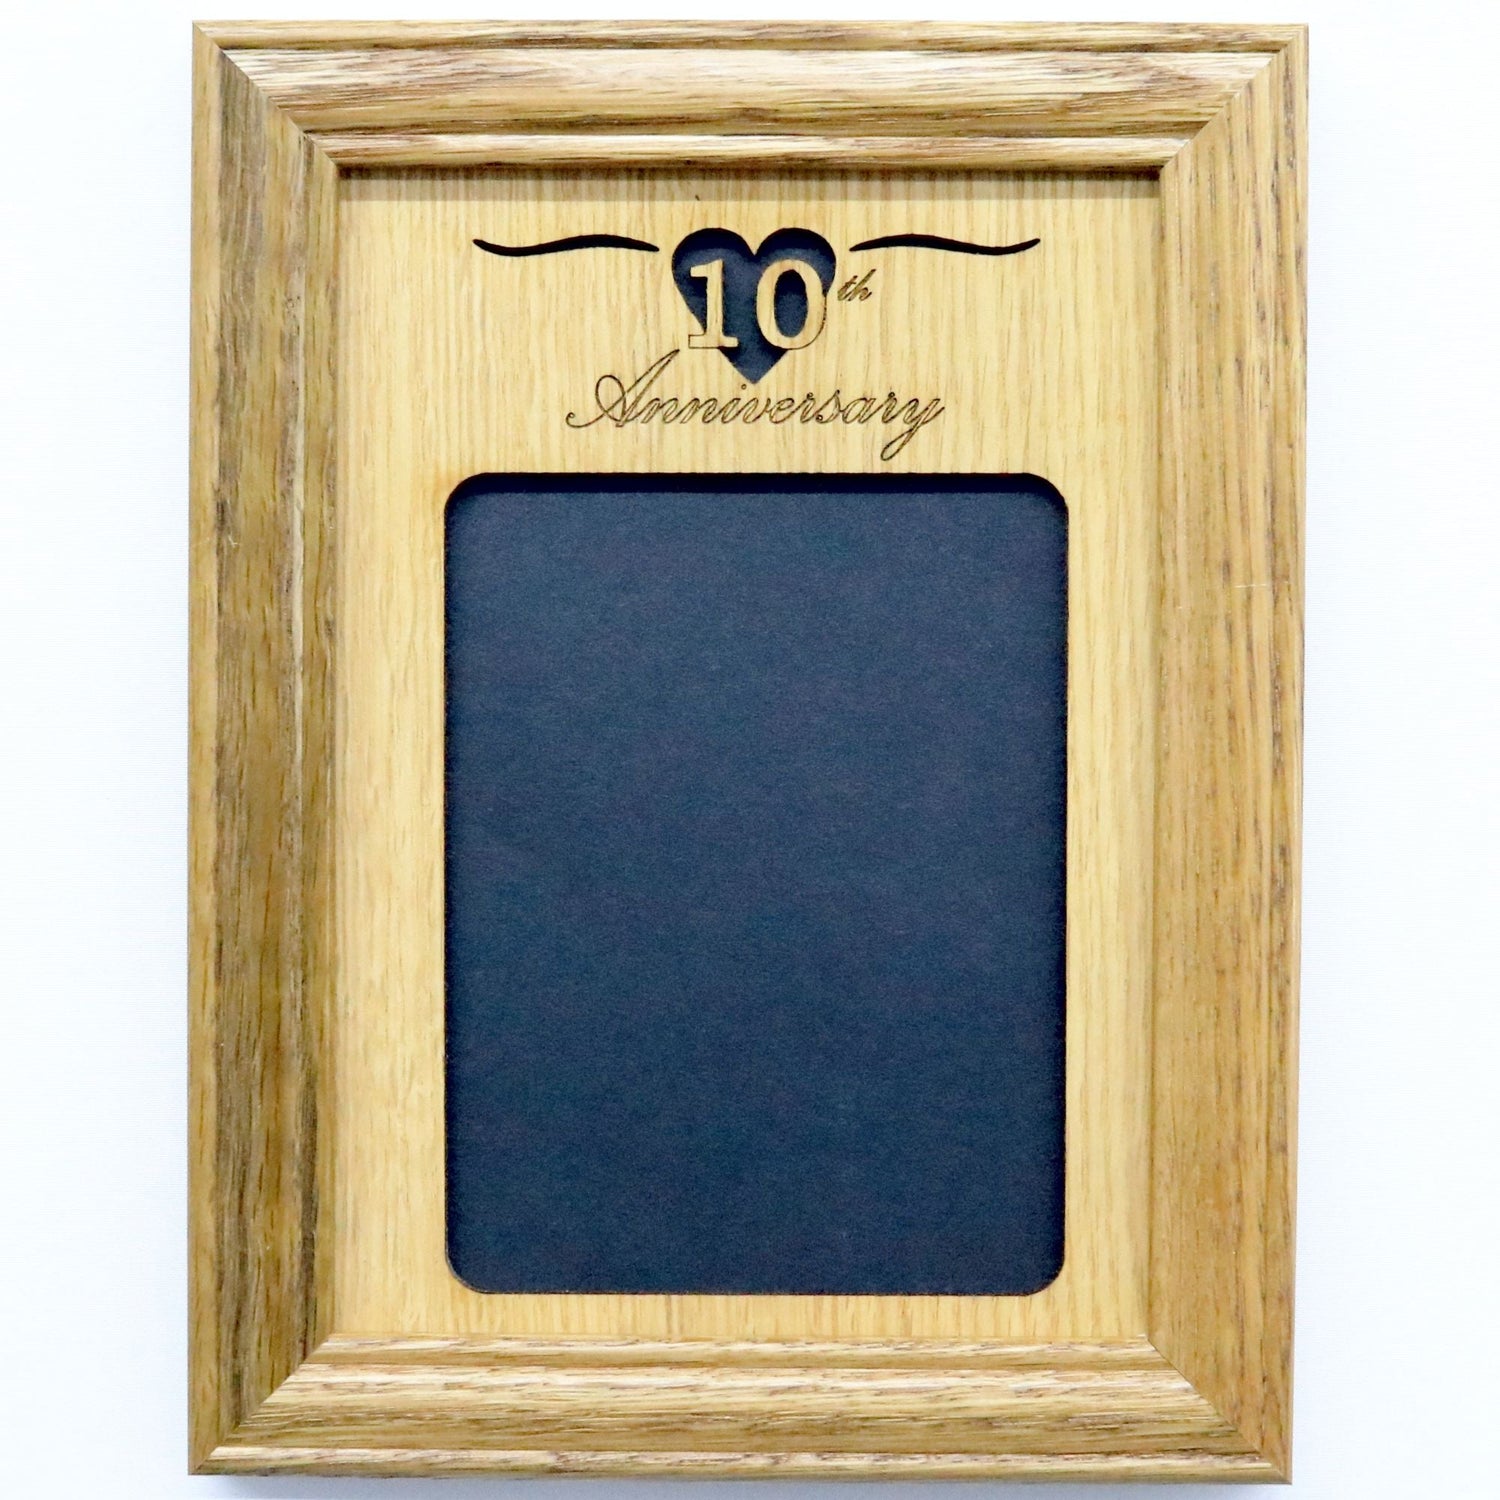 10th Anniversary Picture Frame - 10th Anniversary Picture Frame - Legacy Images - Picture Frames - Legacy Images - Picture Frames